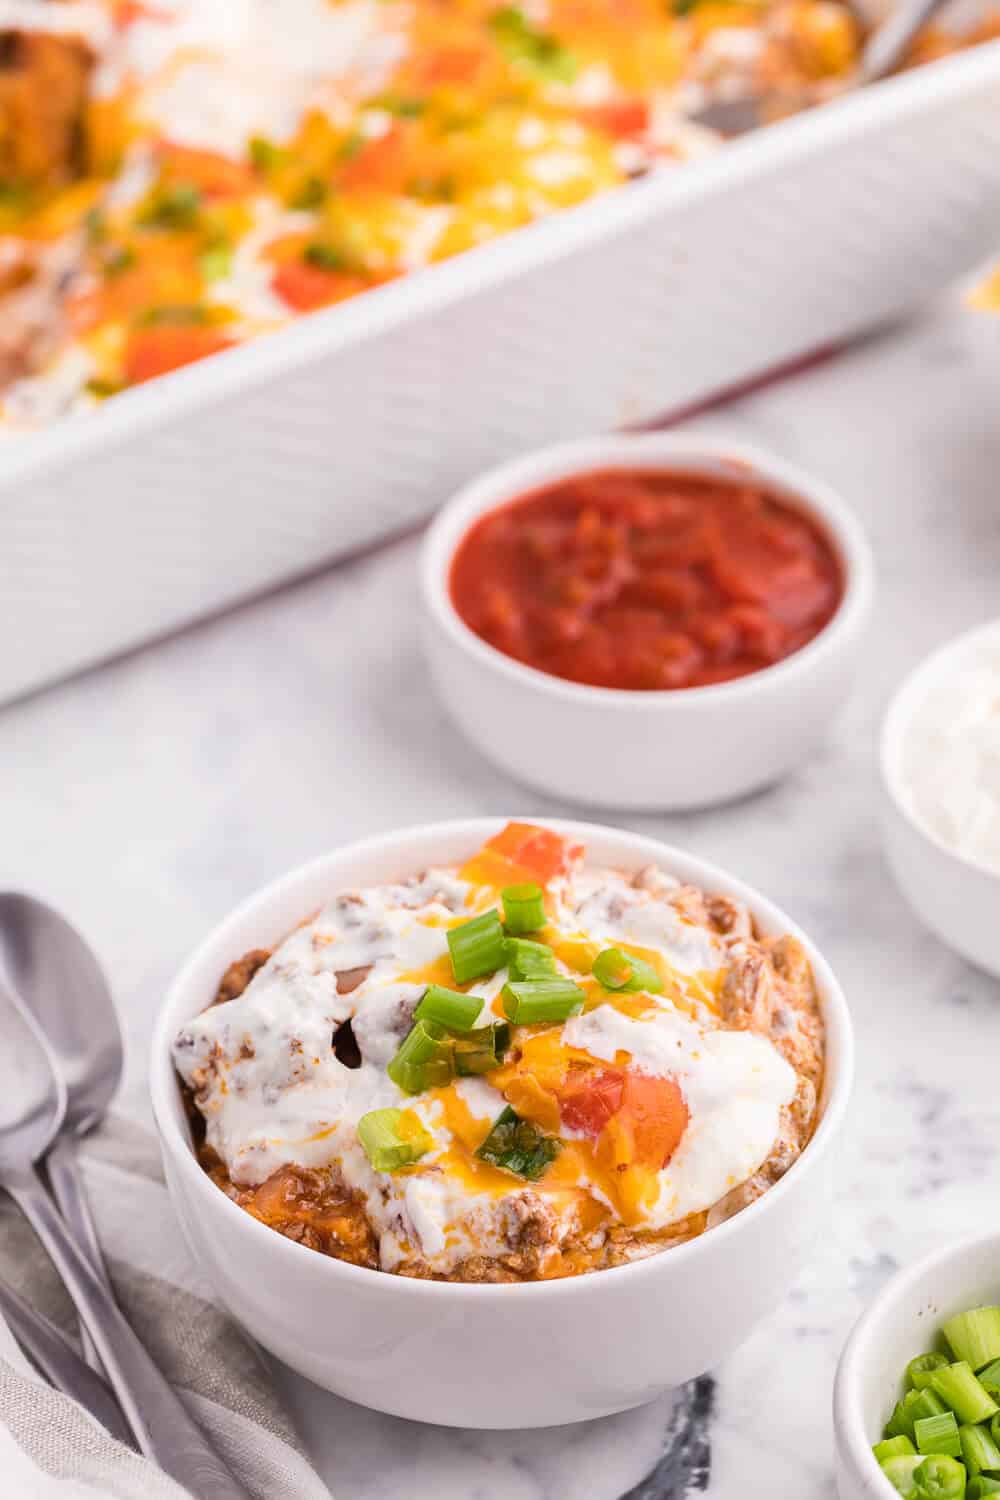 Taco Casserole - A fun twist on Taco Tuesday! This easy casserole has all the ingredients we love about tacos, baked together in one convenient baking dish - quick to make and quick to clean up!